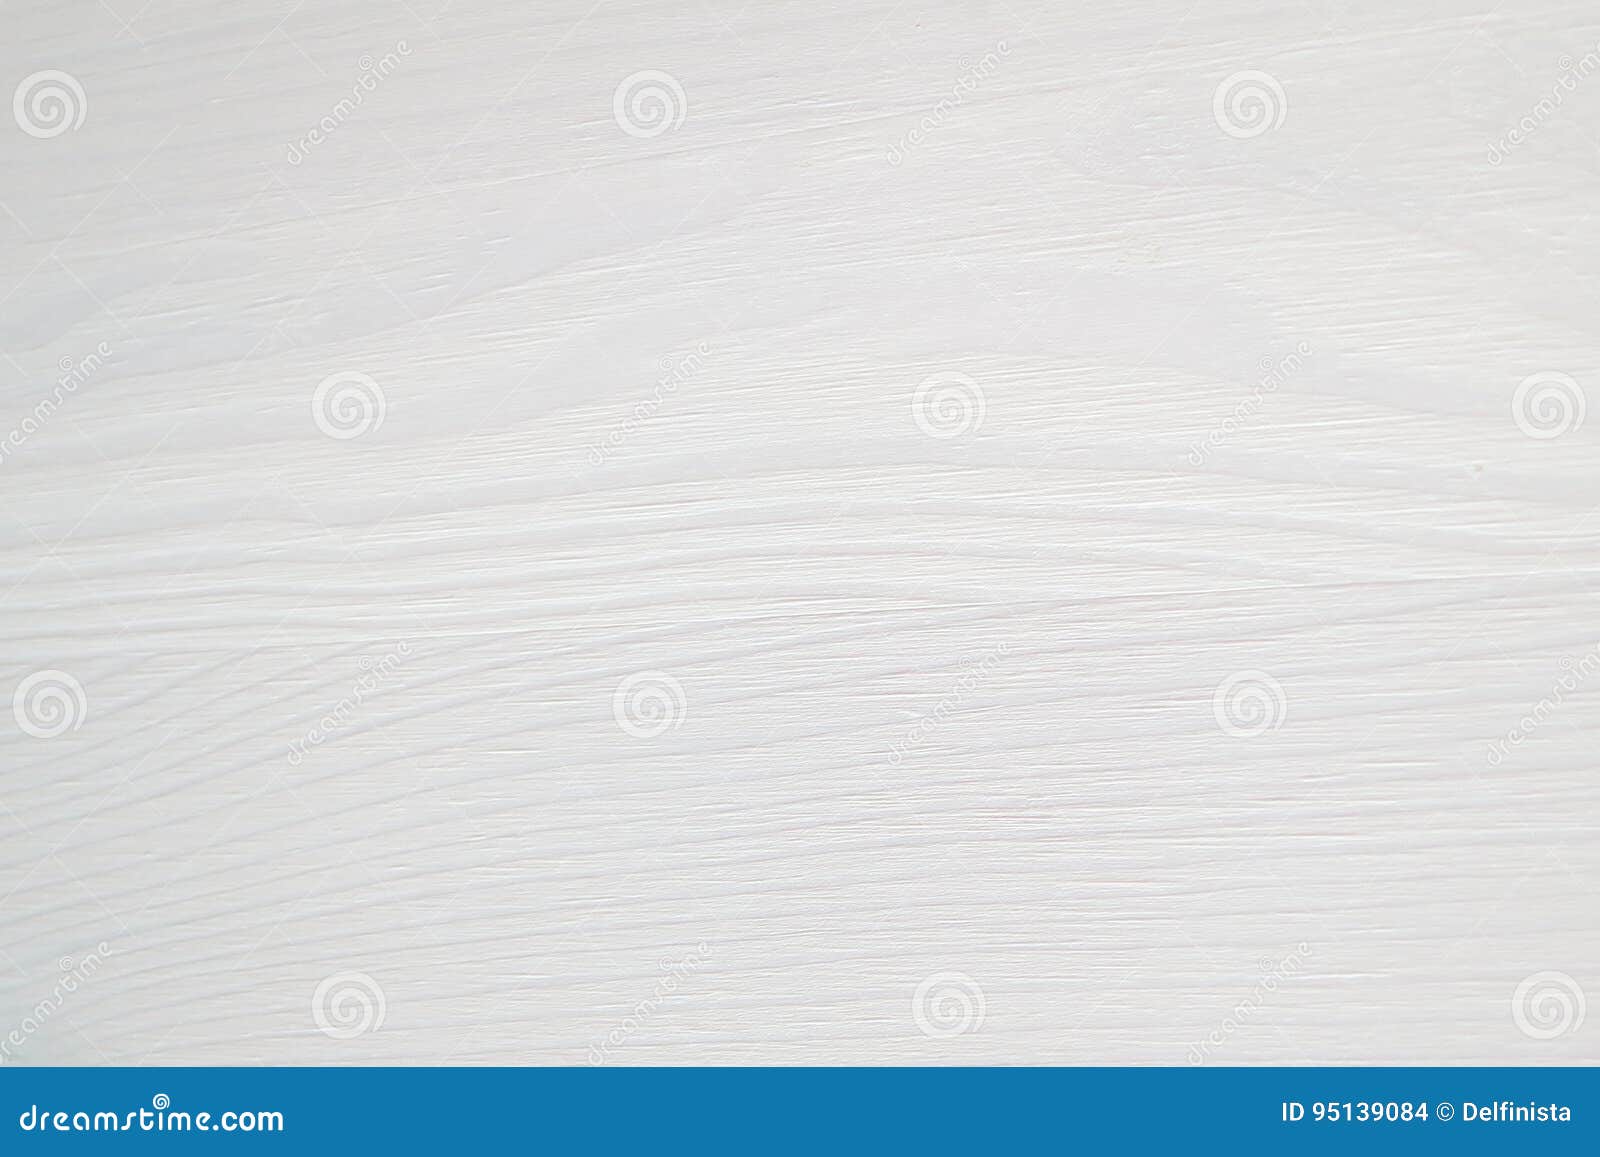 white wood texture background - wooden desk table wall or floor